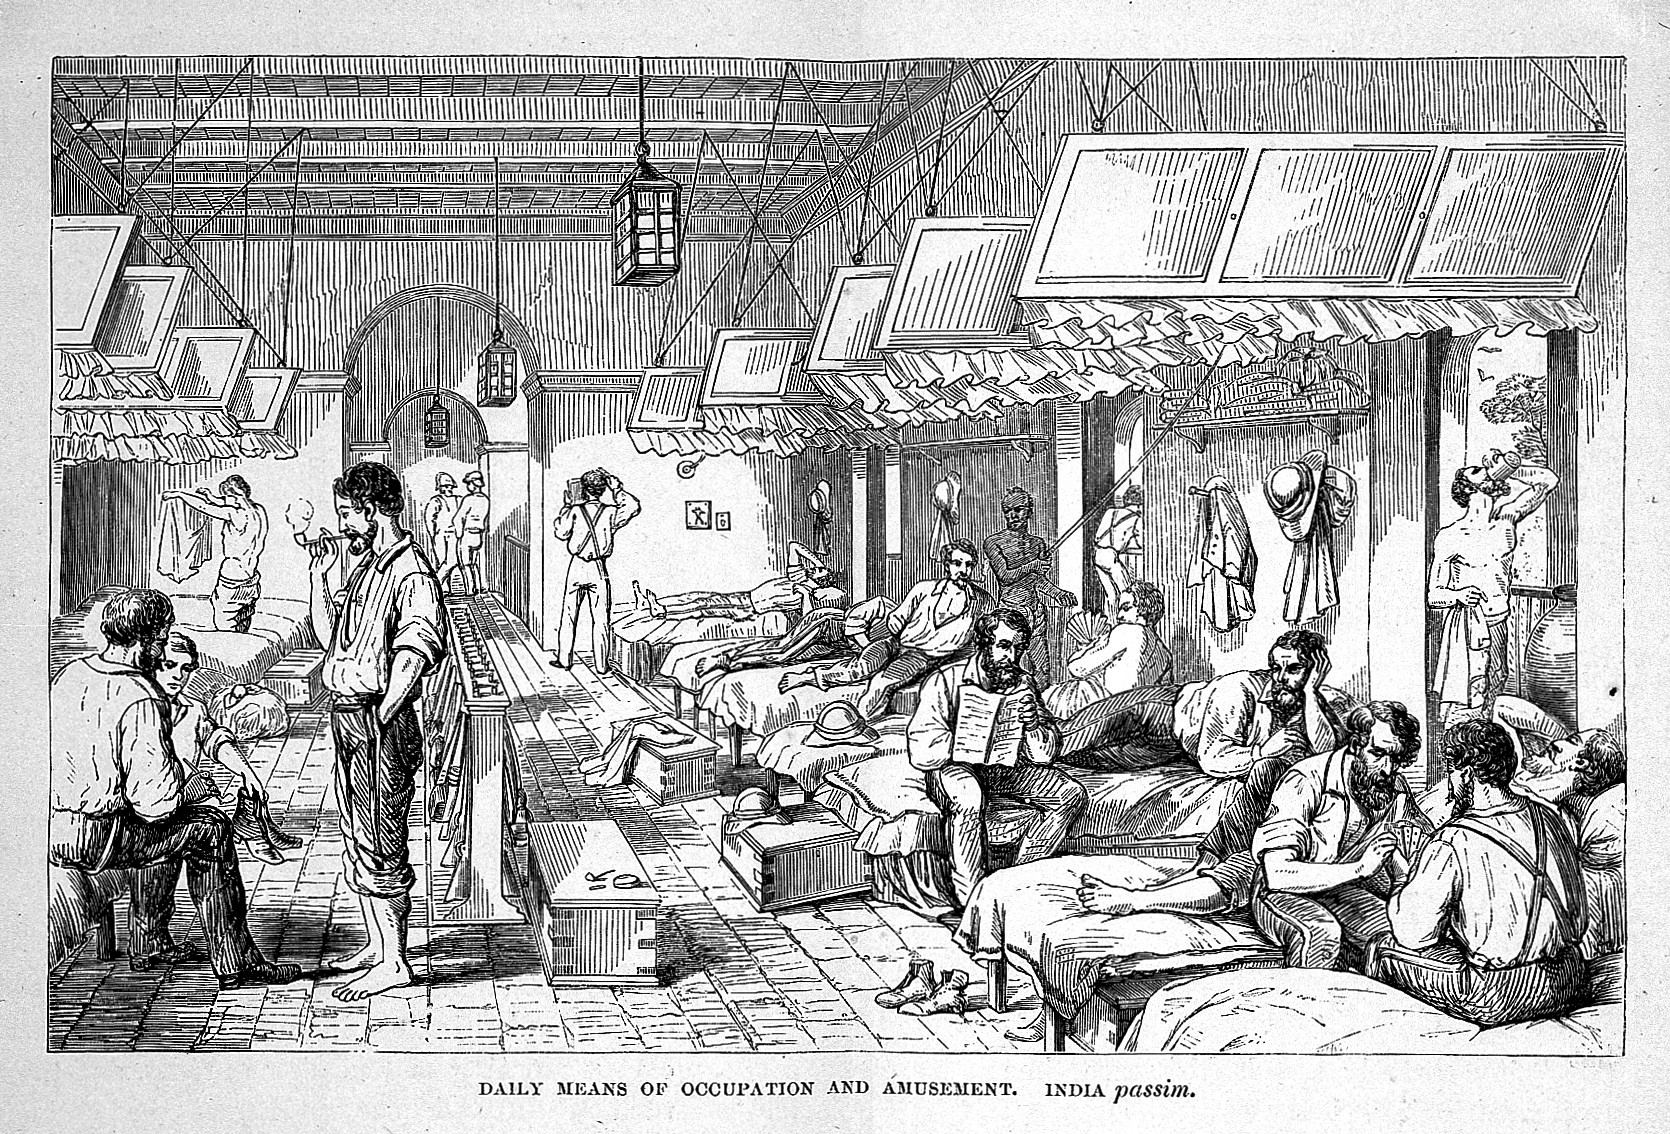 •	Fig. 4: Illumination of British Troops Barracks in India, n.d. The British Army at rest in their barracks; Wellcome Collection (2018-04-03): https://wellcomecollection.org/works/x9t2xex9; CC-BY.